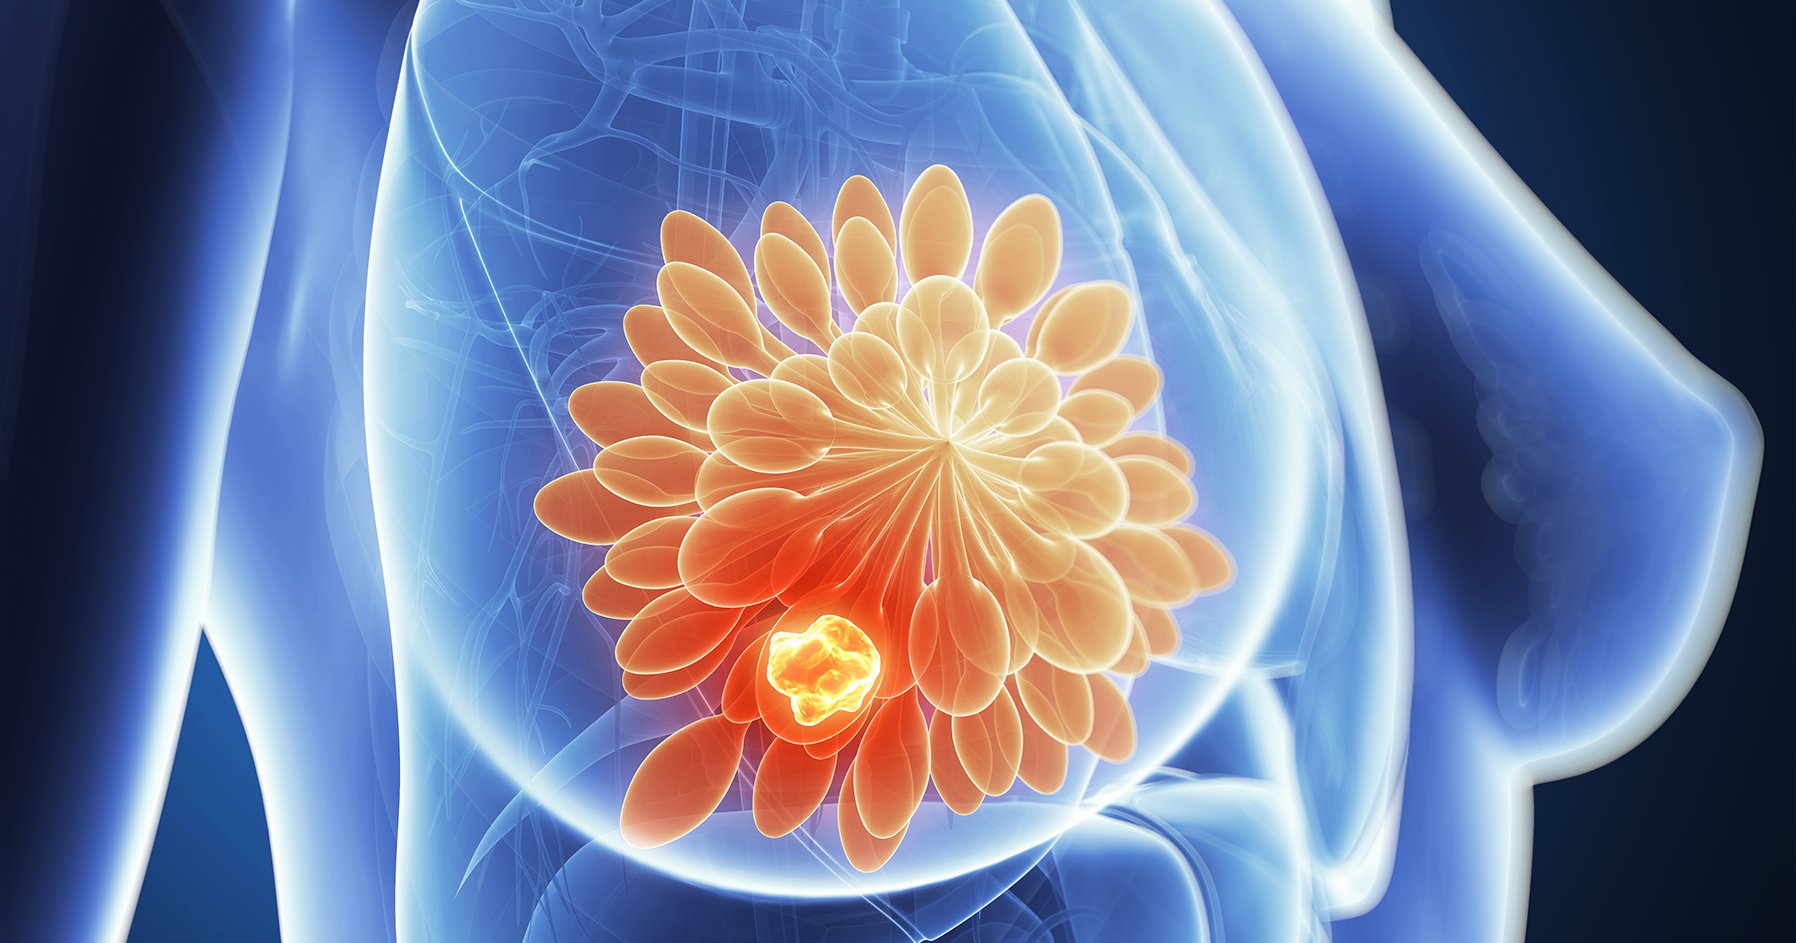 Post Breast Cancer: Hormones, Health, and Holistic Healing